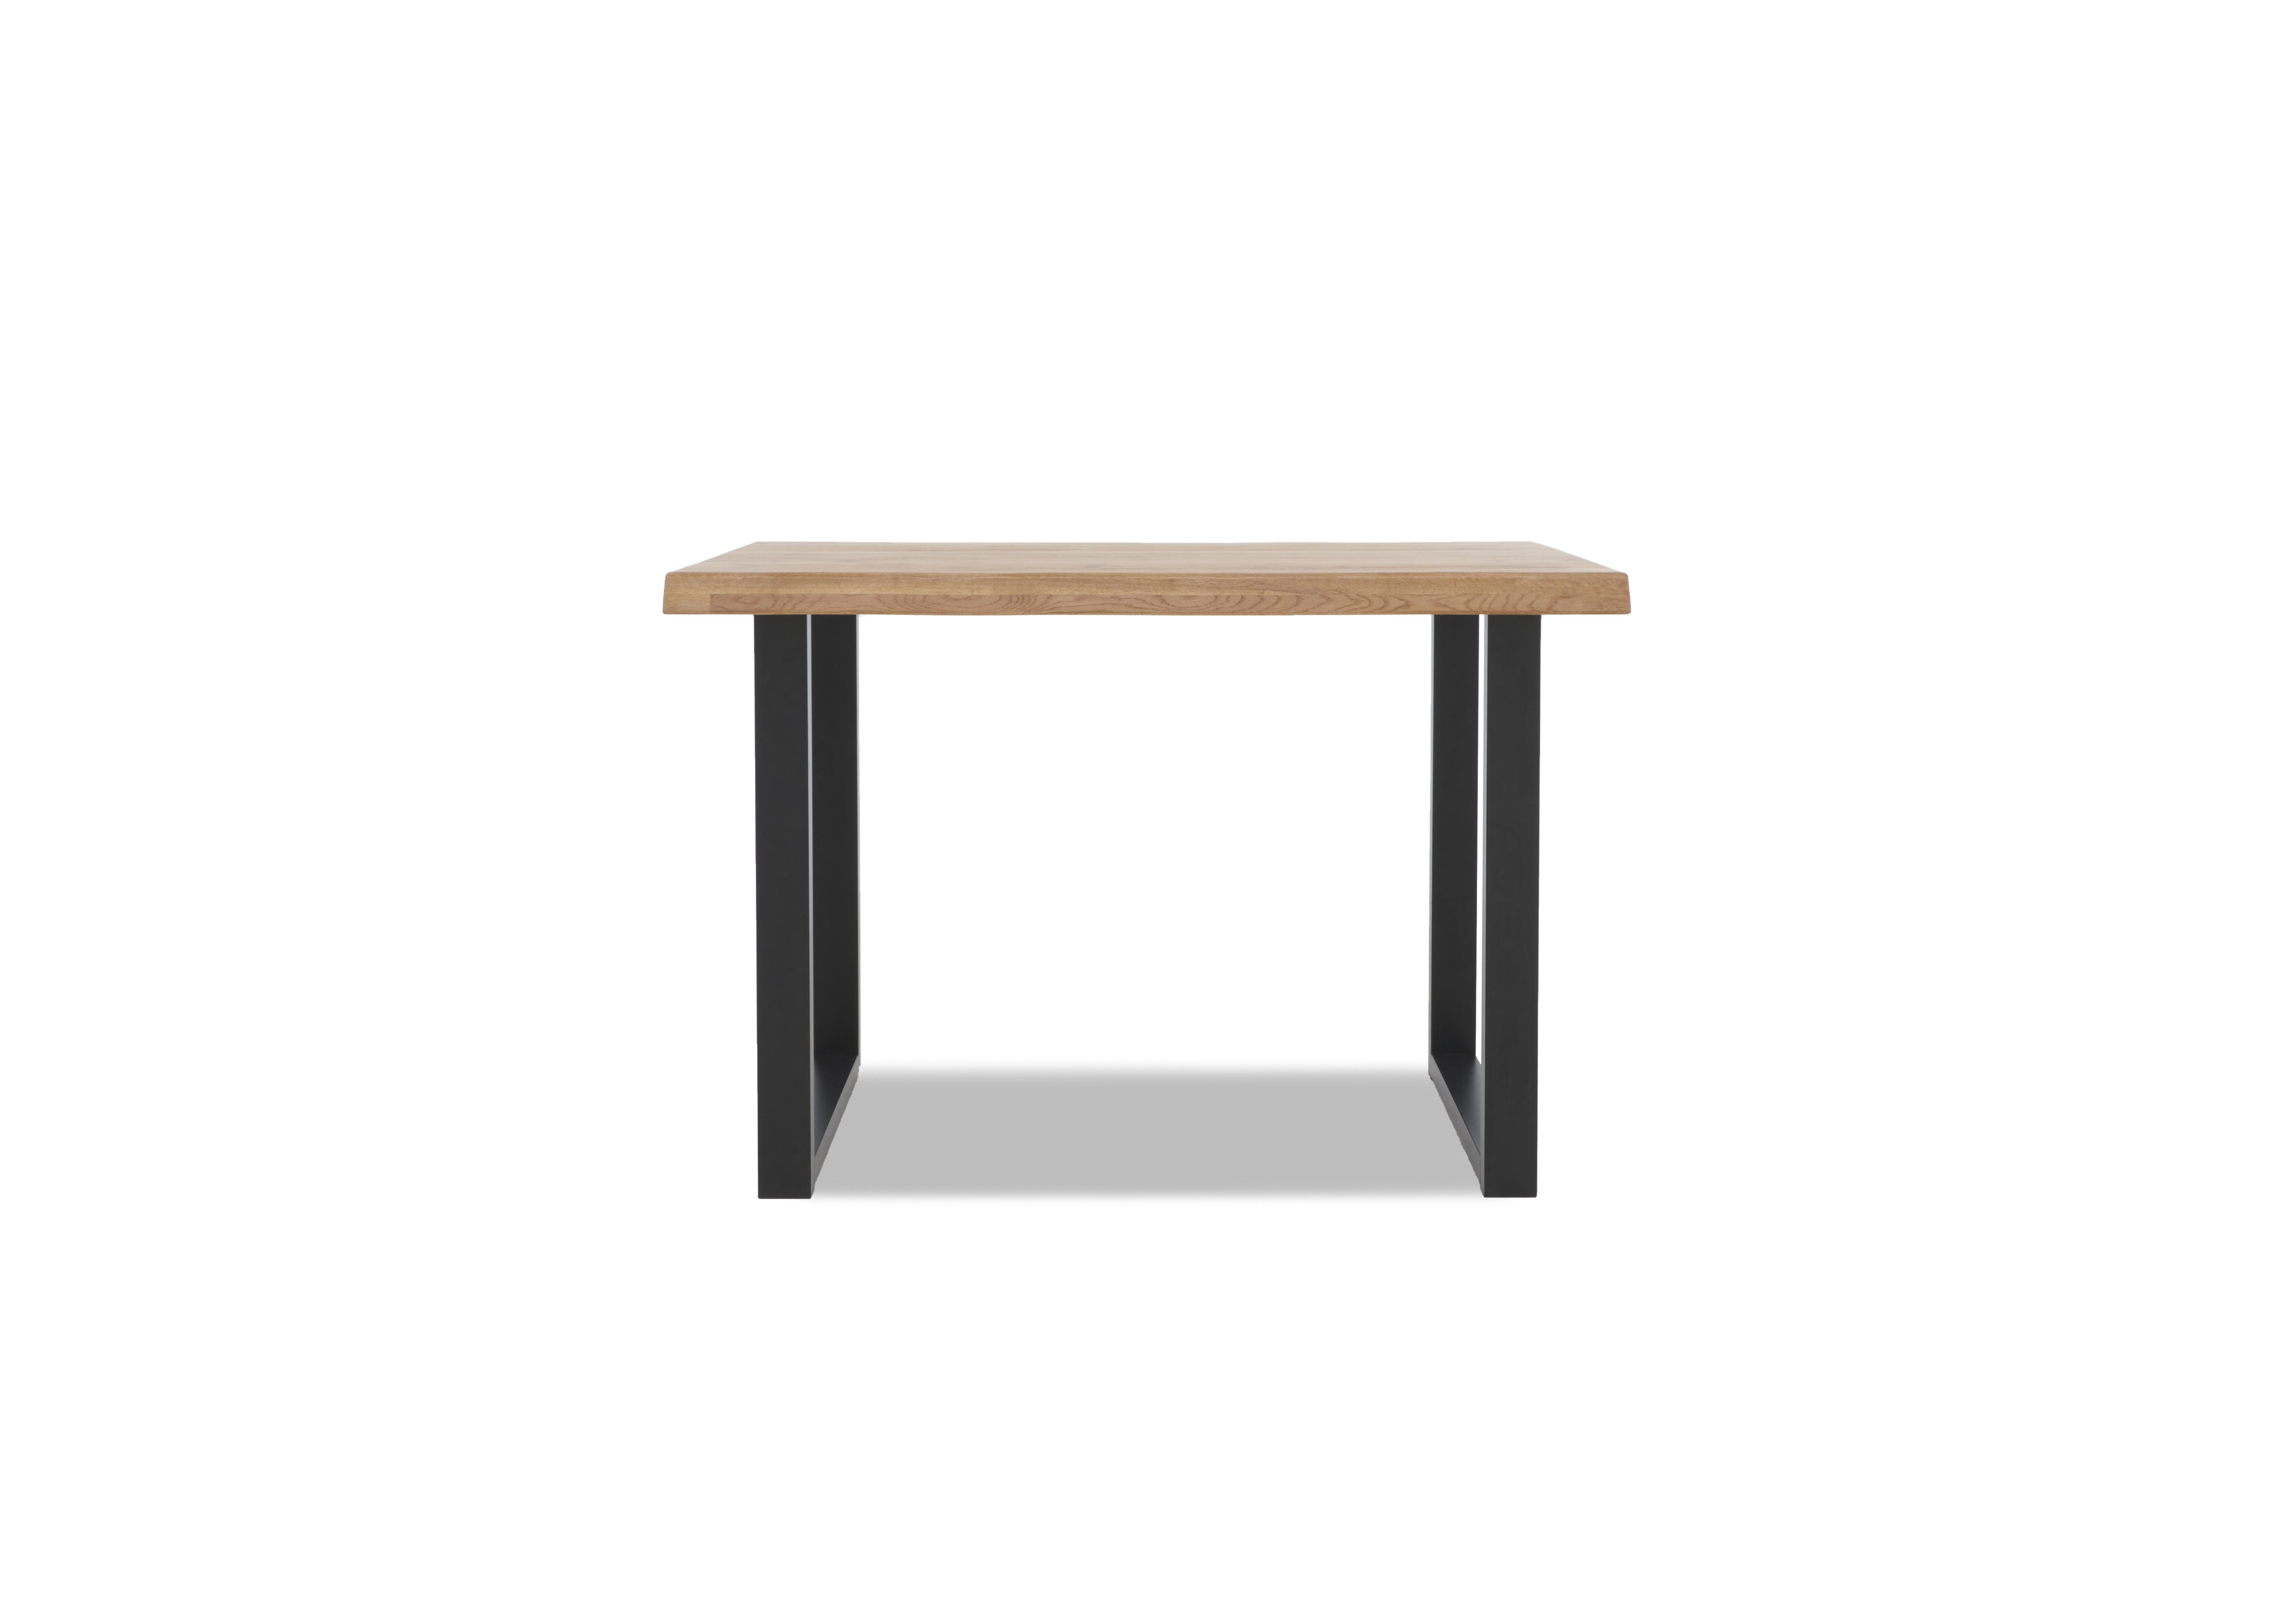 Compact Terra Raw Edge Bar Table with U-Shaped Legs in 01 Oiled on Furniture Village